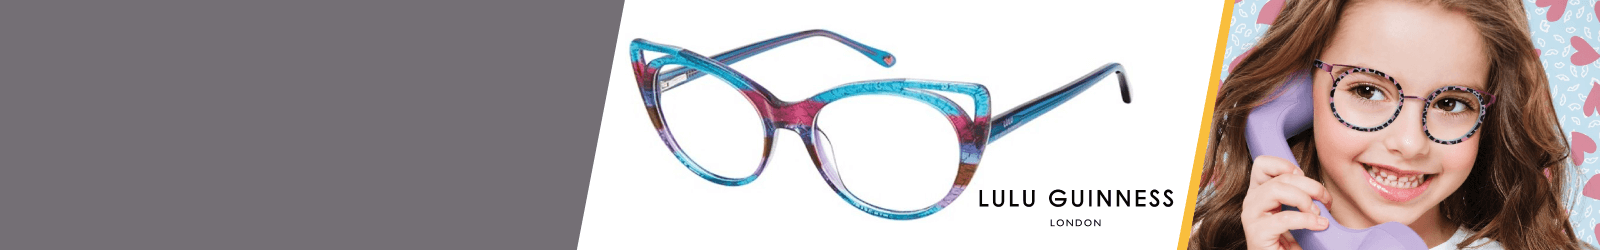 Silver Lulu Guinness Kids Glasses from 2 to 4-year-old